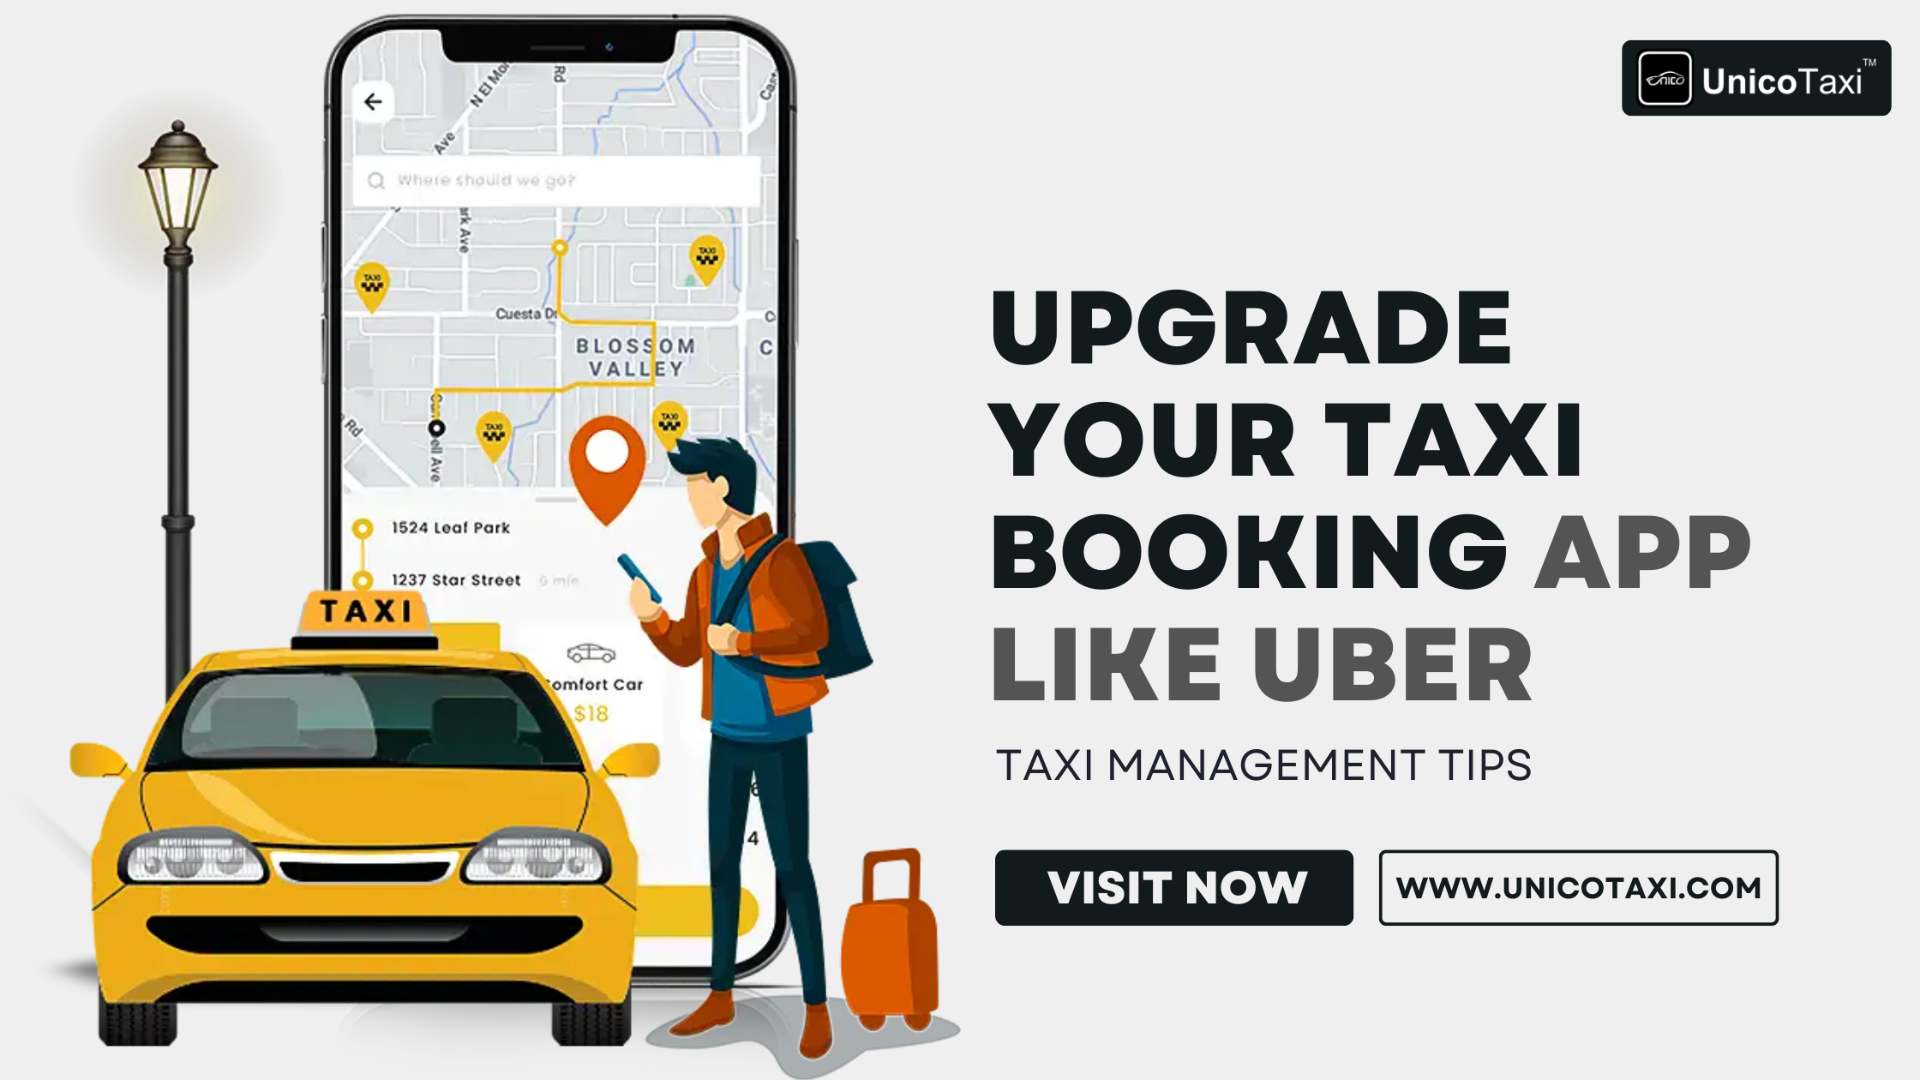 Upgrade Your Taxi Booking App like Uber: Taxi Management Tips